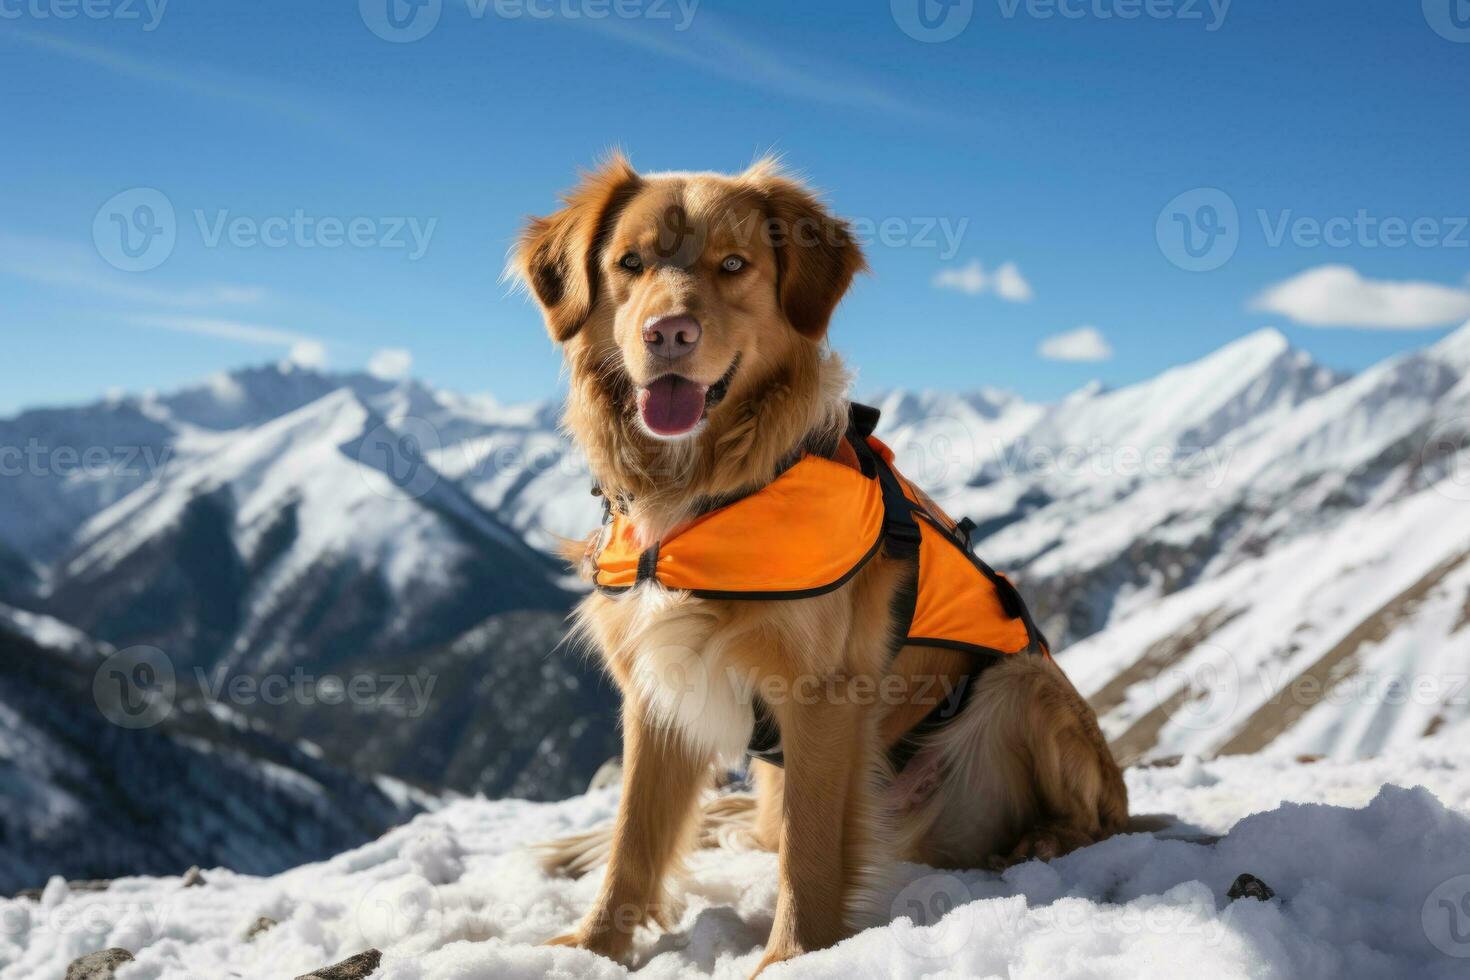 Determined rescue dog trained in locating missing persons in snowy Alpine photo